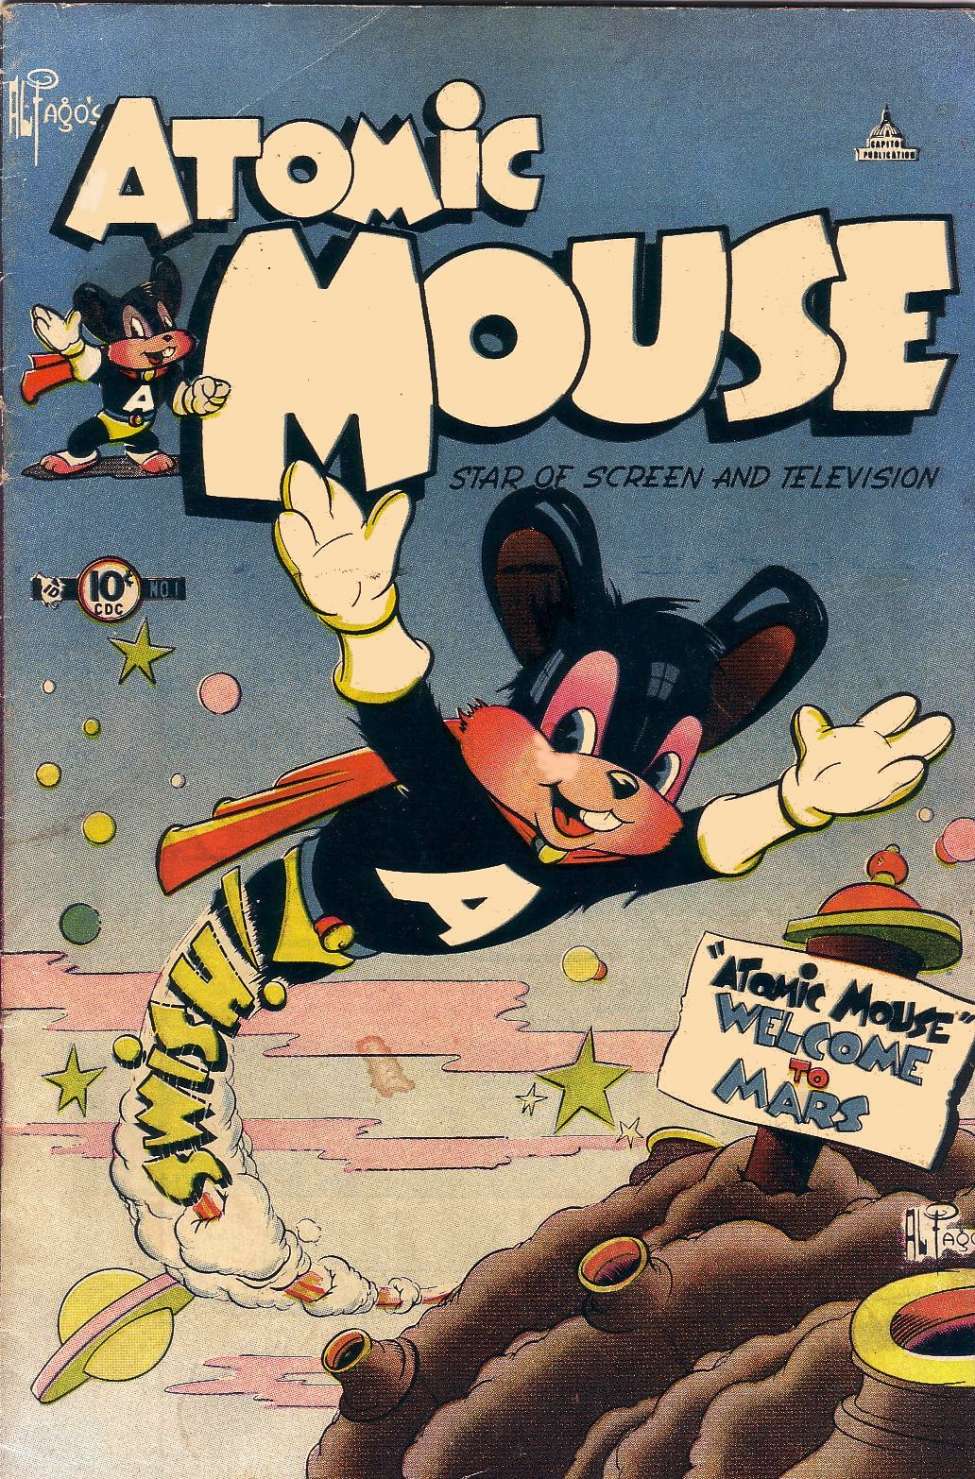 Book Cover For Atomic Mouse 1 - Version 1